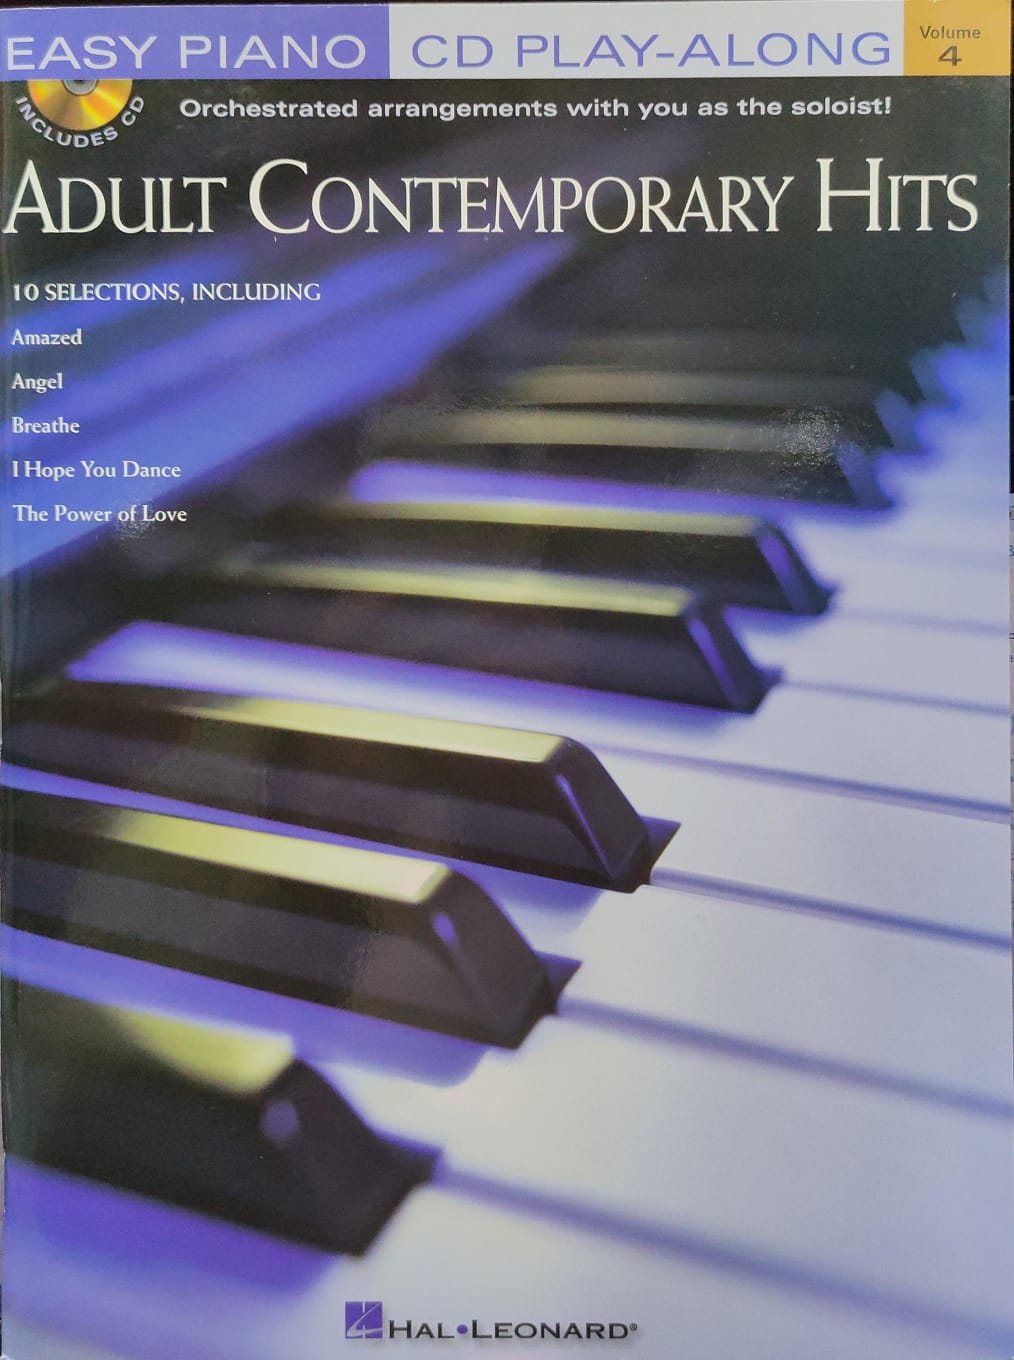 (Easy Piano CD Play-Along ) Adult Contemporary Hits Volume 4